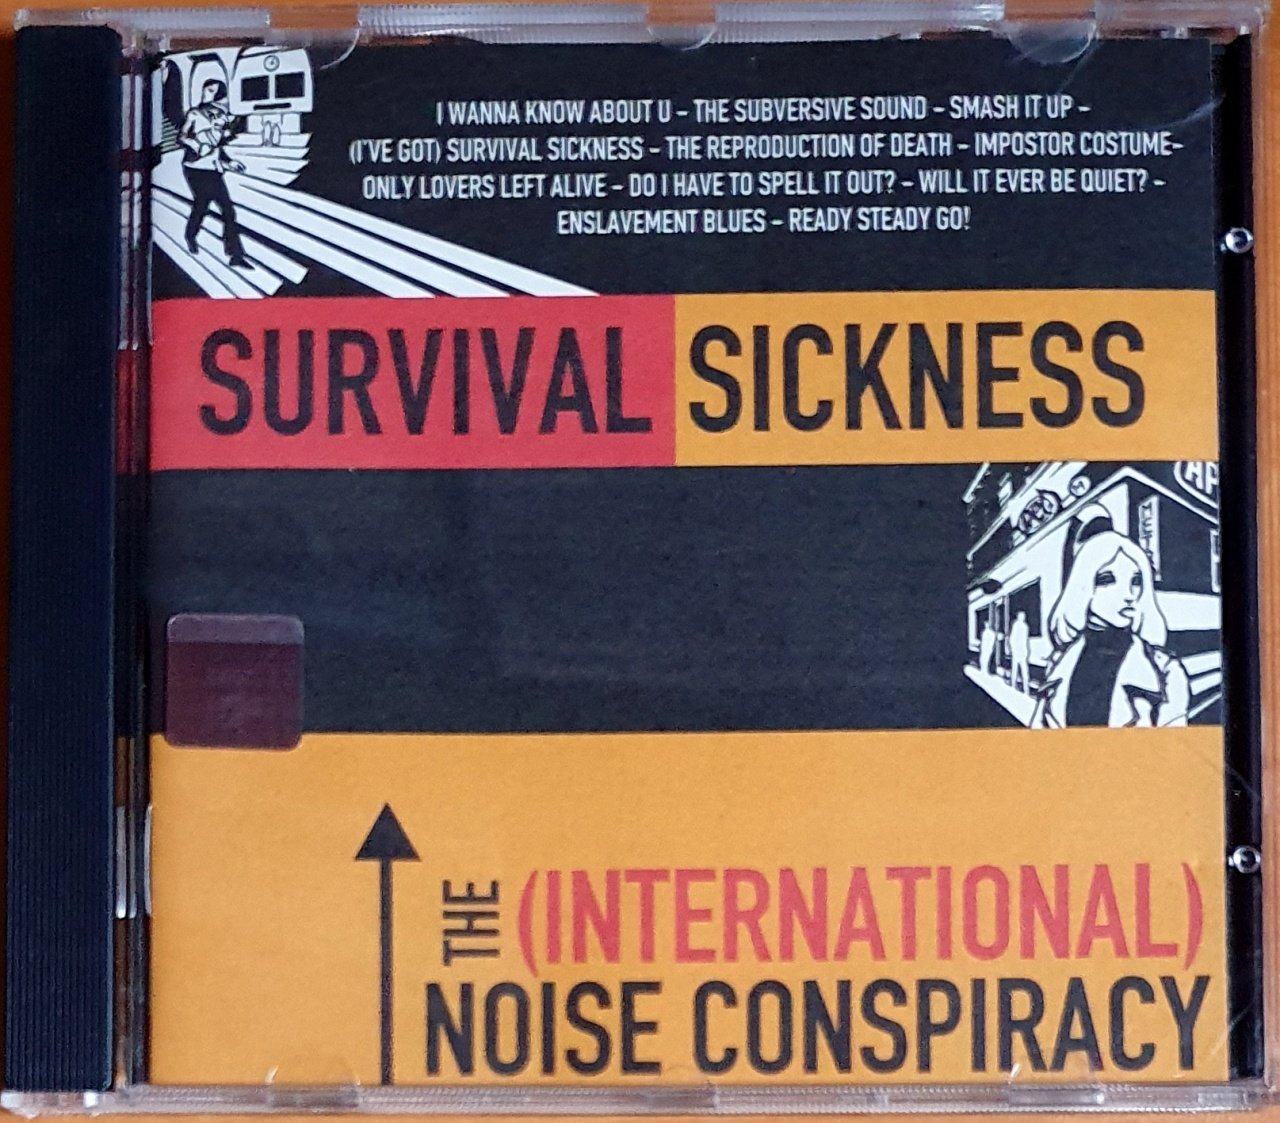 THE [INTERNATIONAL] NOISE CONSPIRACY - SURVIVAL SICKENESS (2000) - CD BURNING HEART RECORDS 2.EL